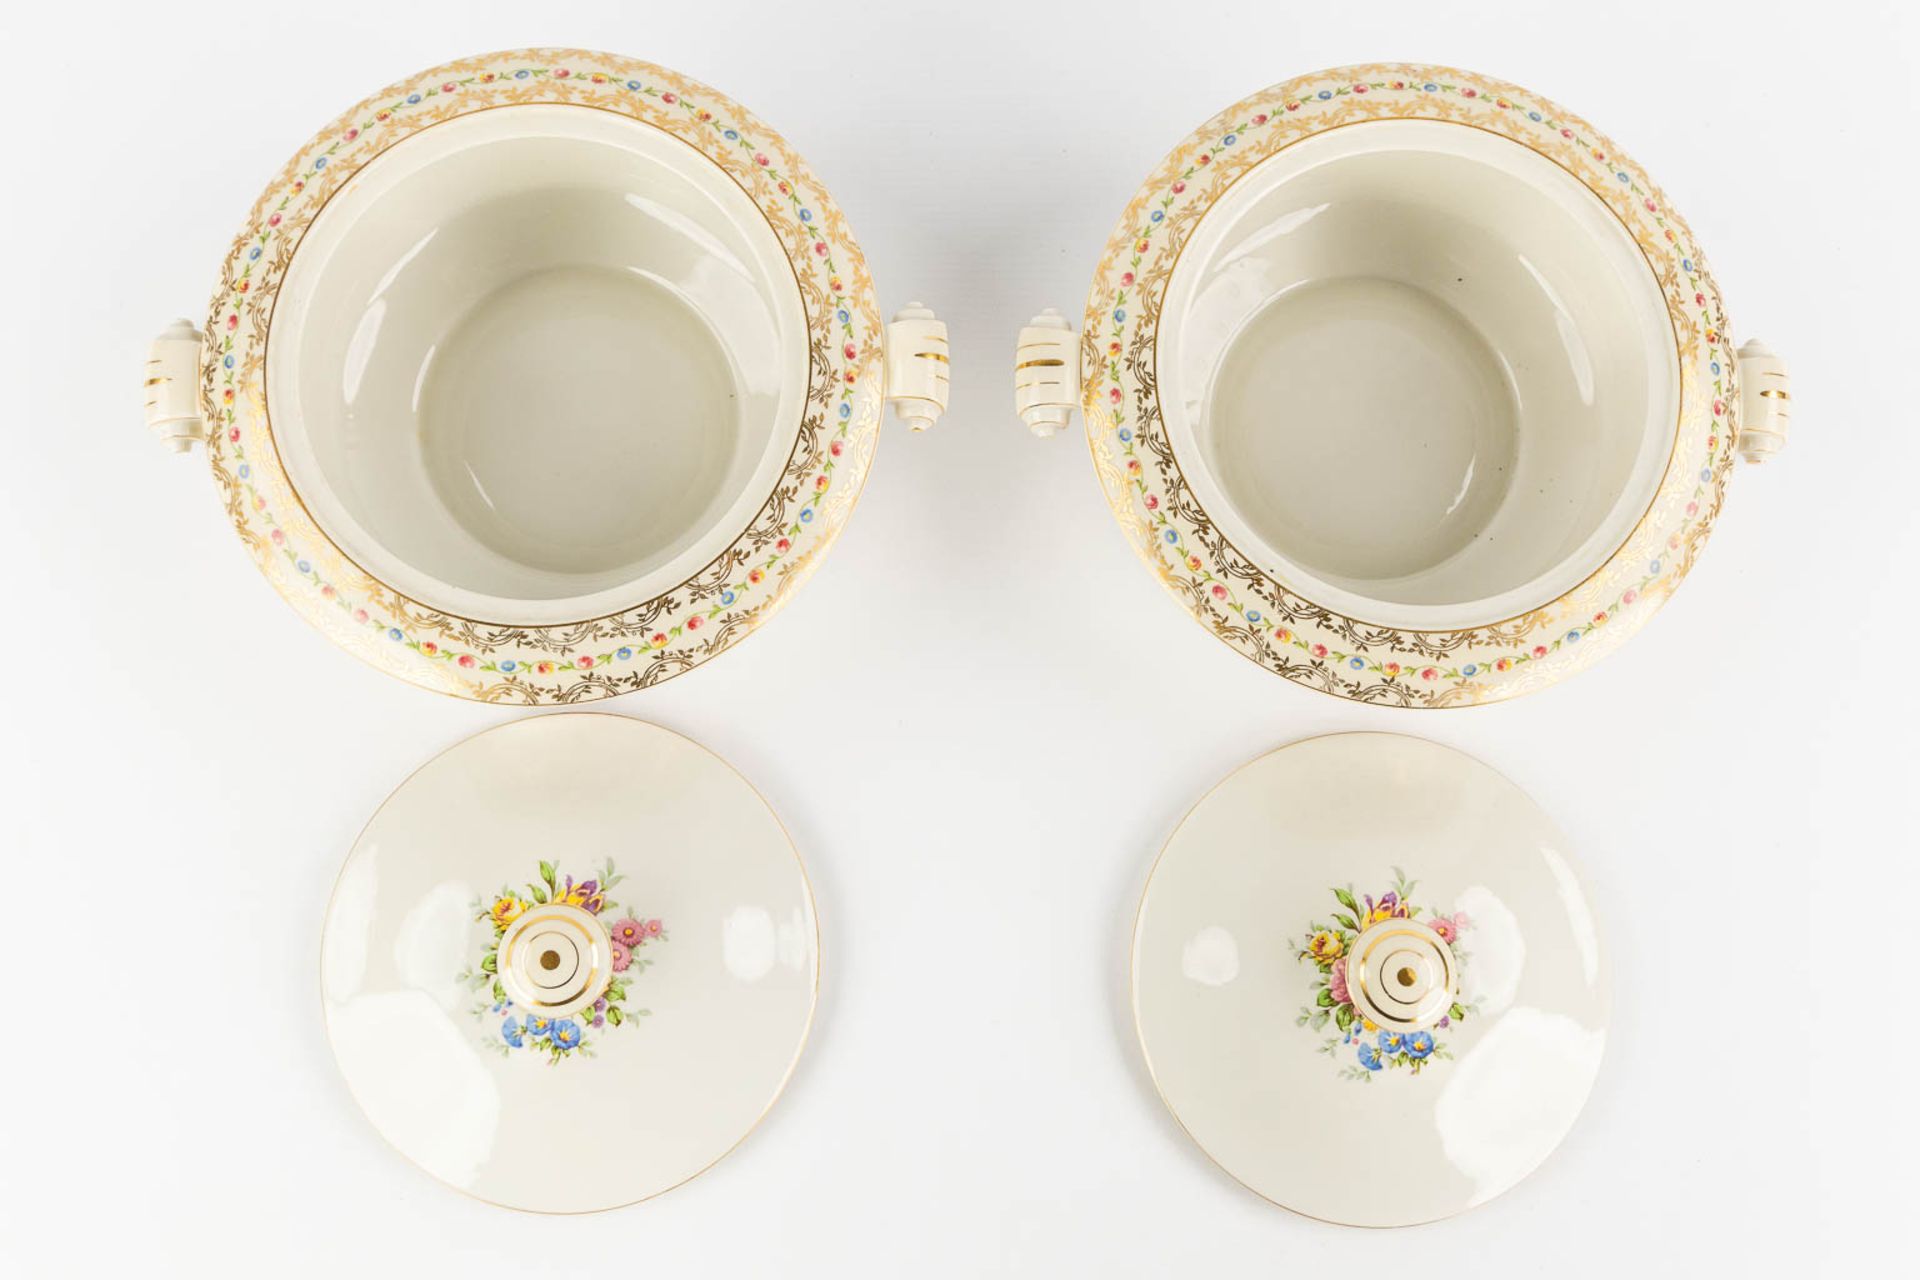 Raynaud, Limoges, a large dinner service. (L:25 x W:35 cm) - Image 9 of 16